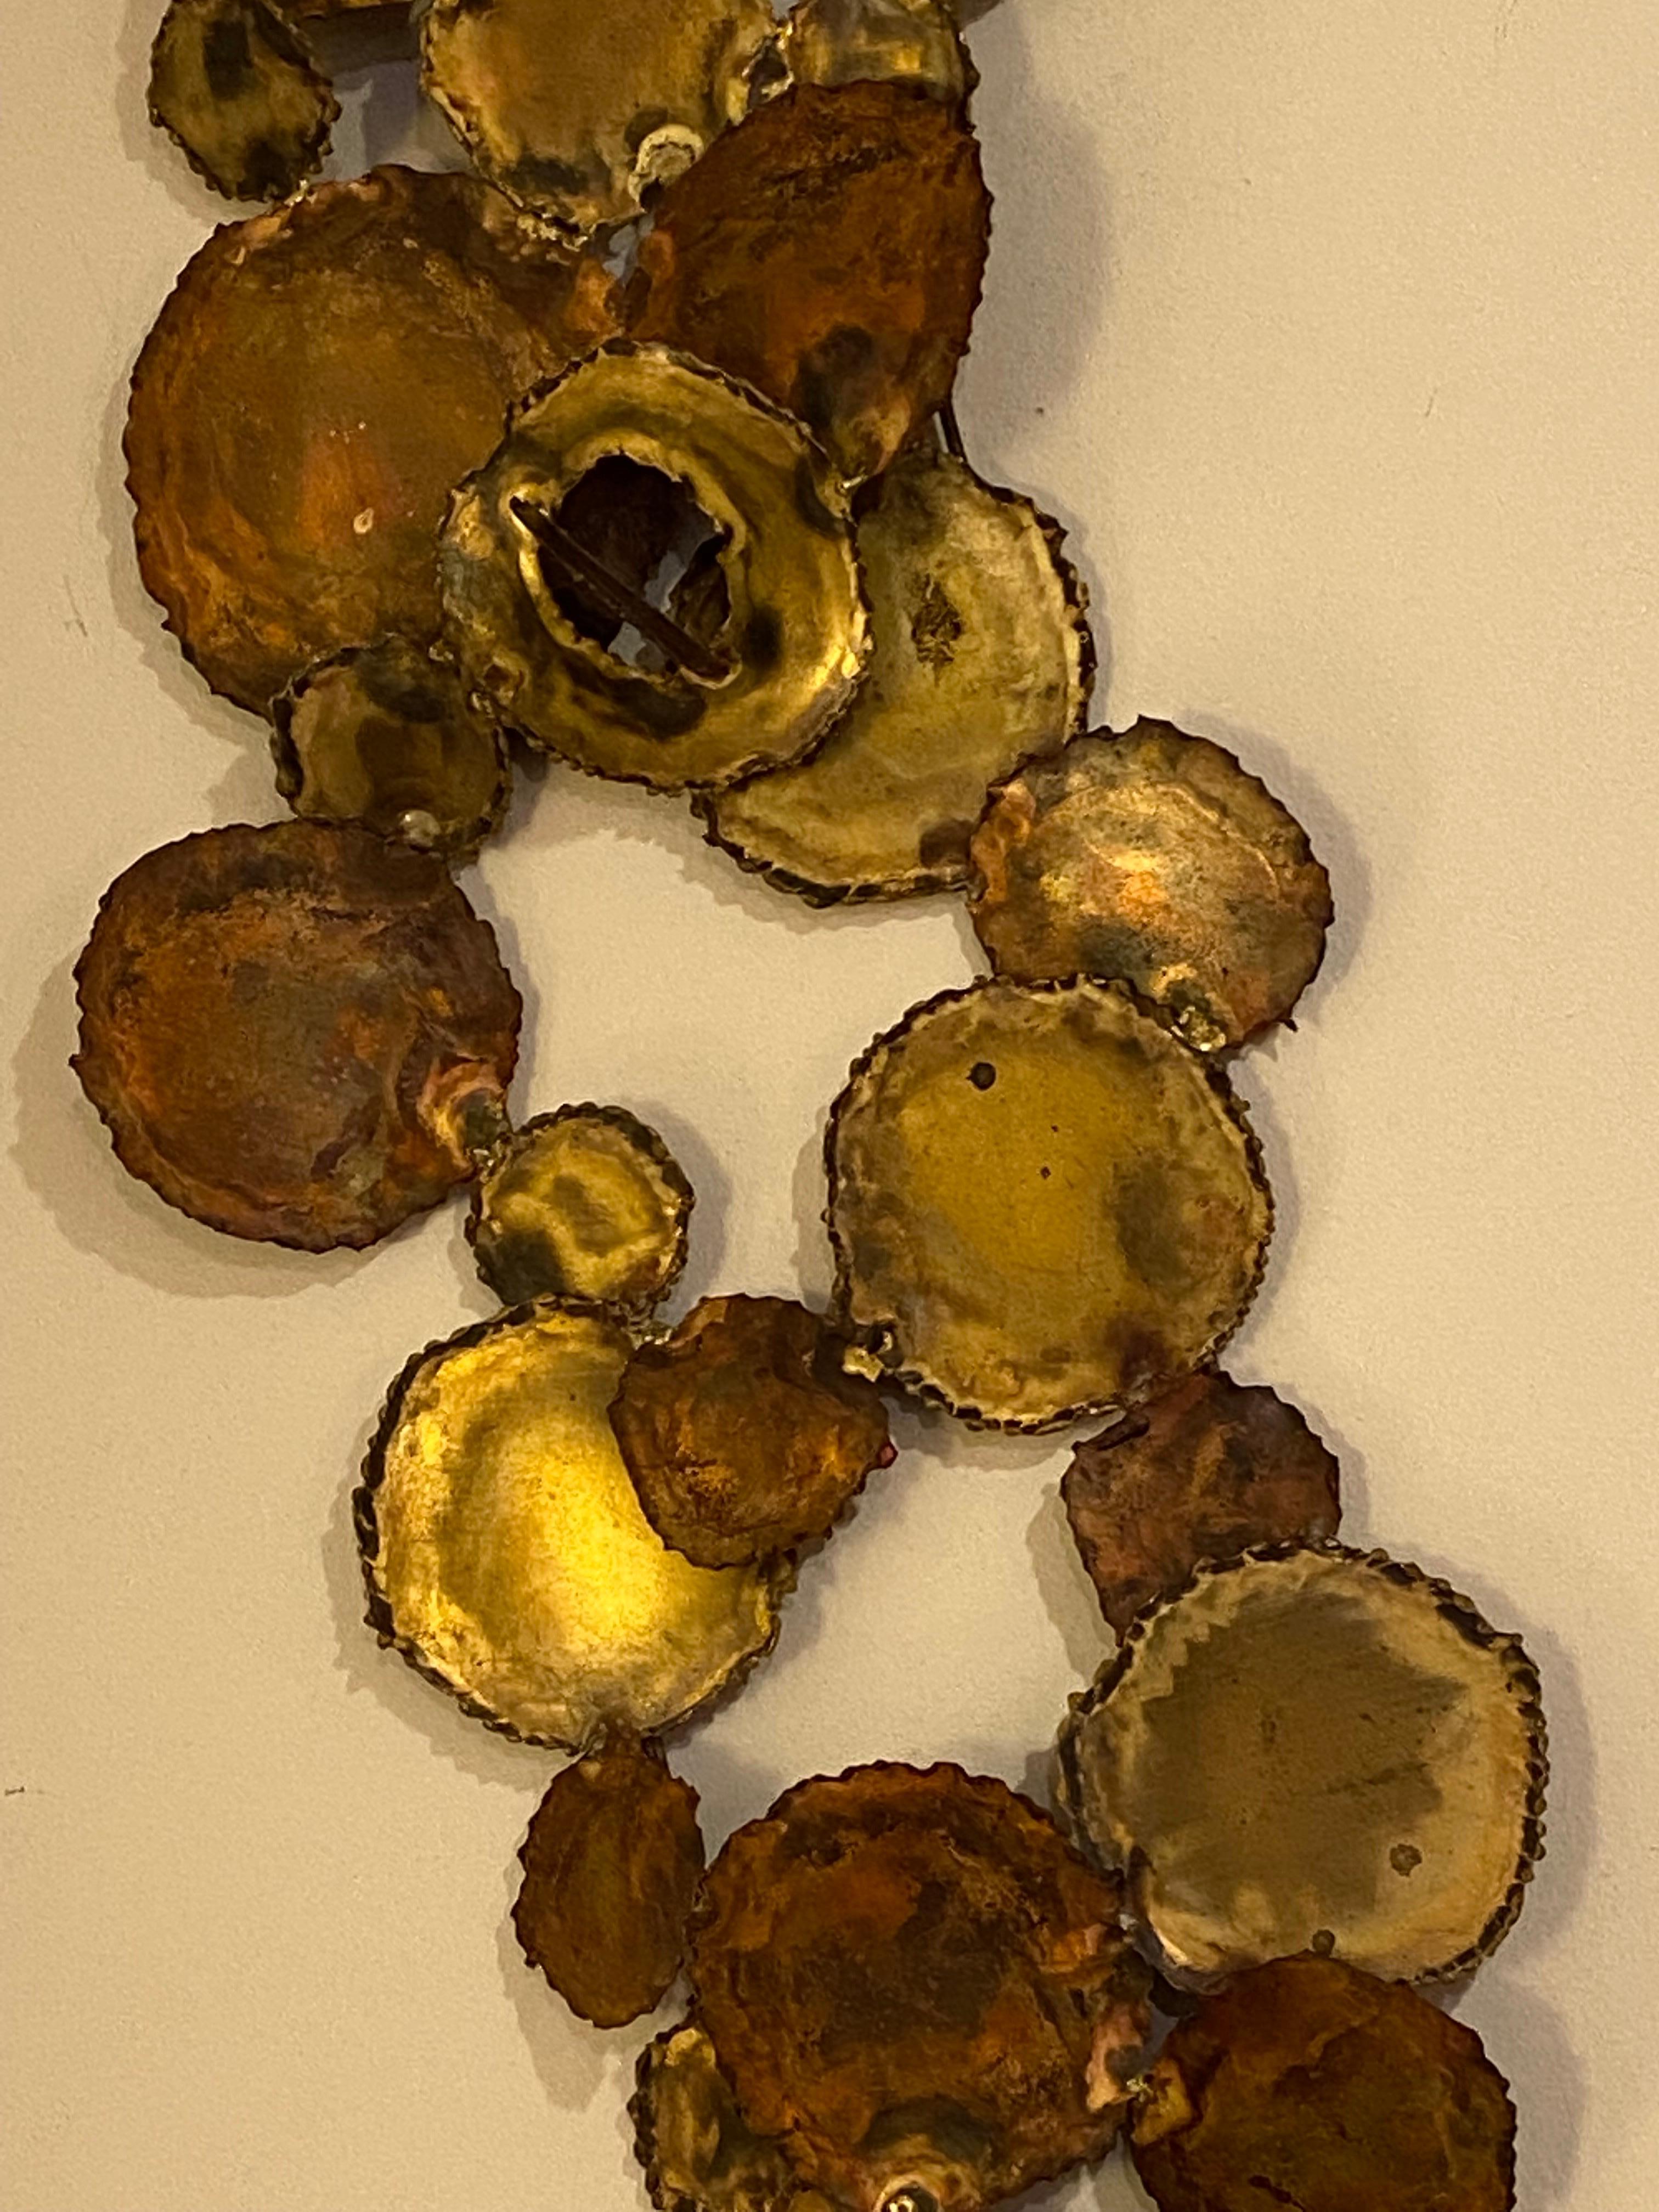 Large Scale C. Jere wall sculpture. Metal with brass and copper details and spot welds around edges of circular discs. Can easily be hung Horizontally or Vertically! One of the biggest ones I have owned!